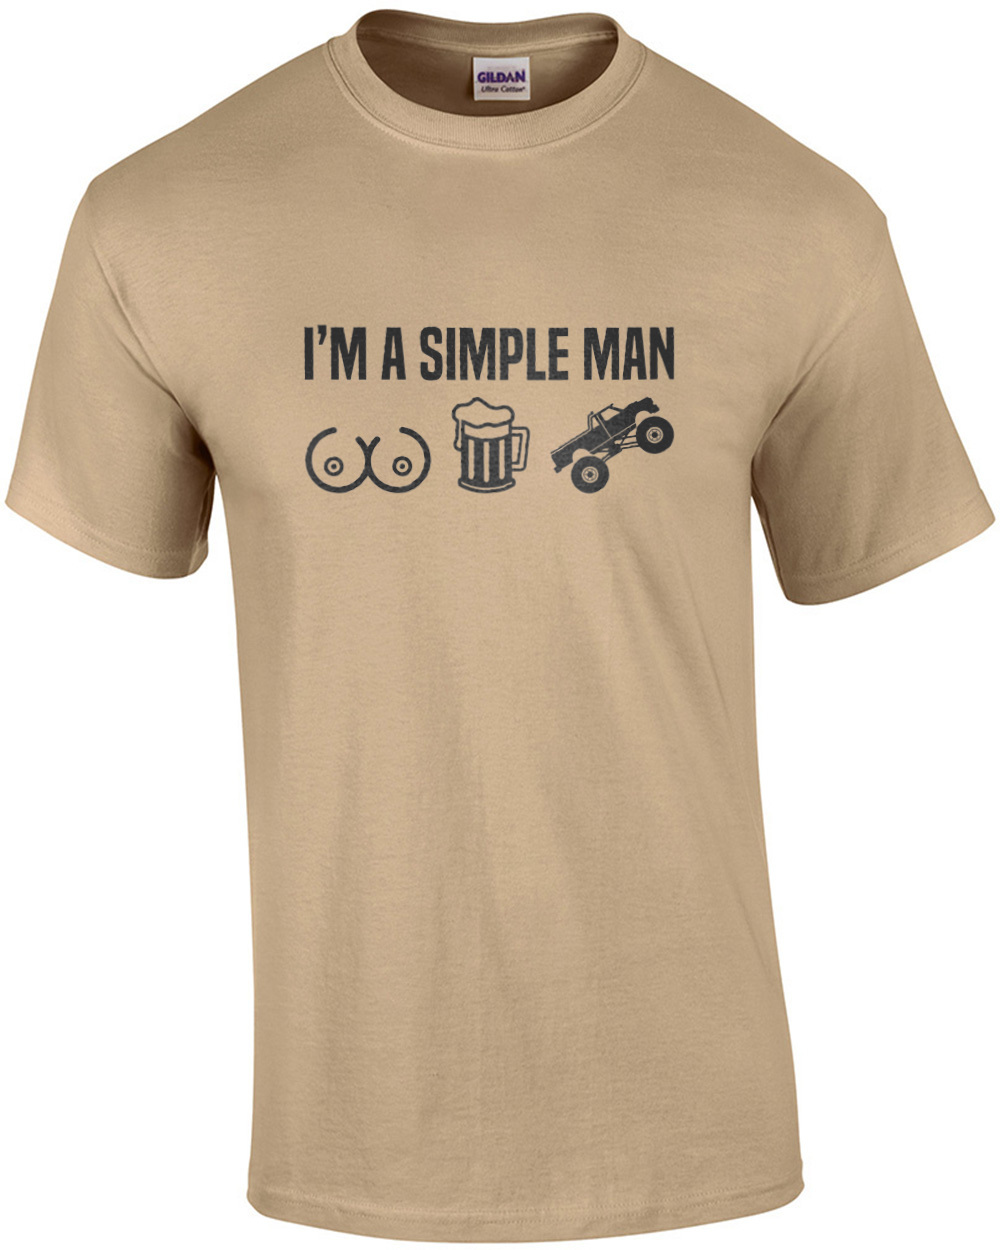 I'm a simple man - breasts, beer, and trucks - funny t-shirt